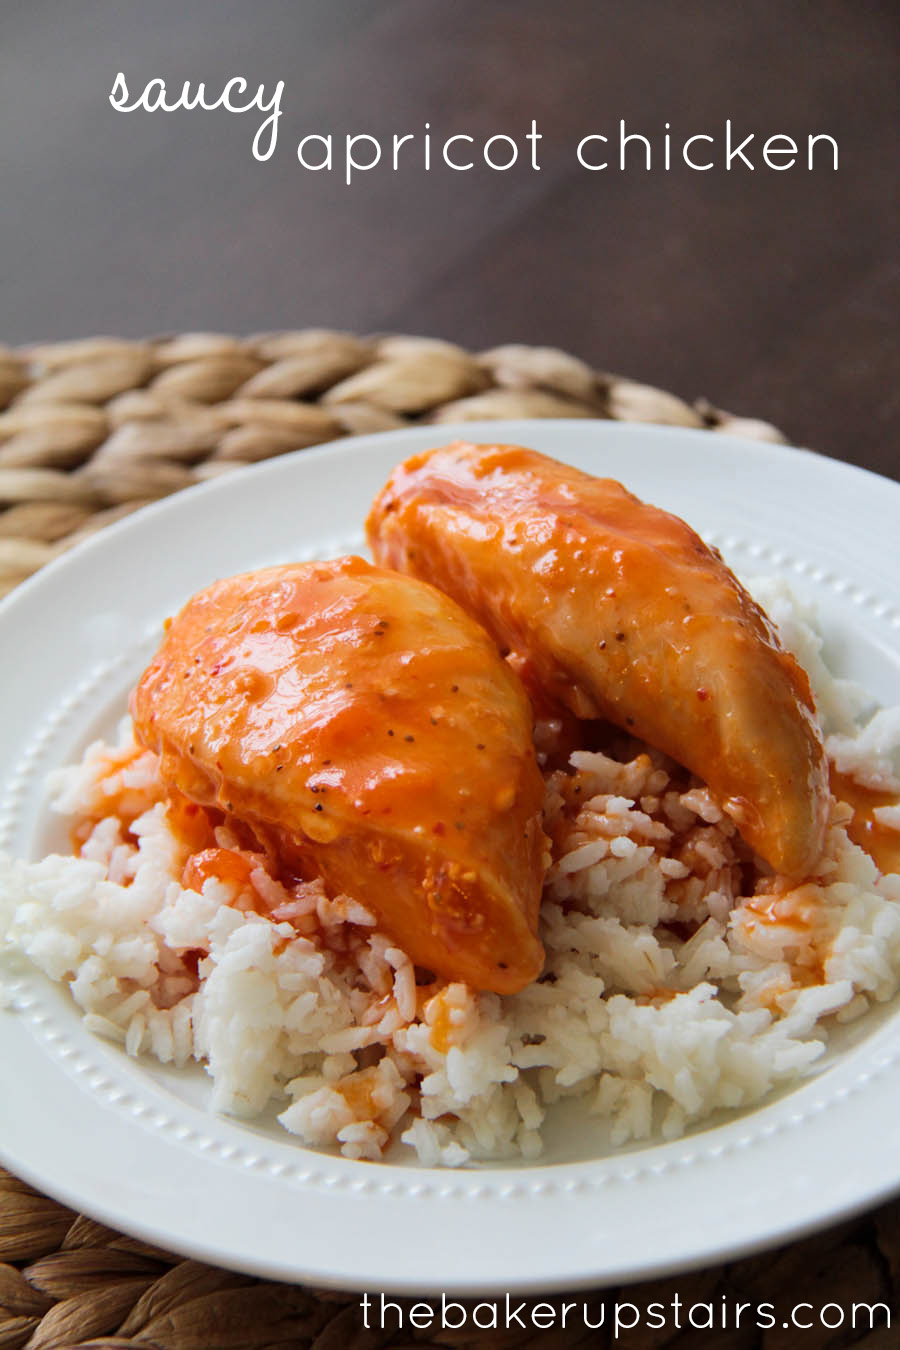 The Baker Upstairs: saucy apricot chicken